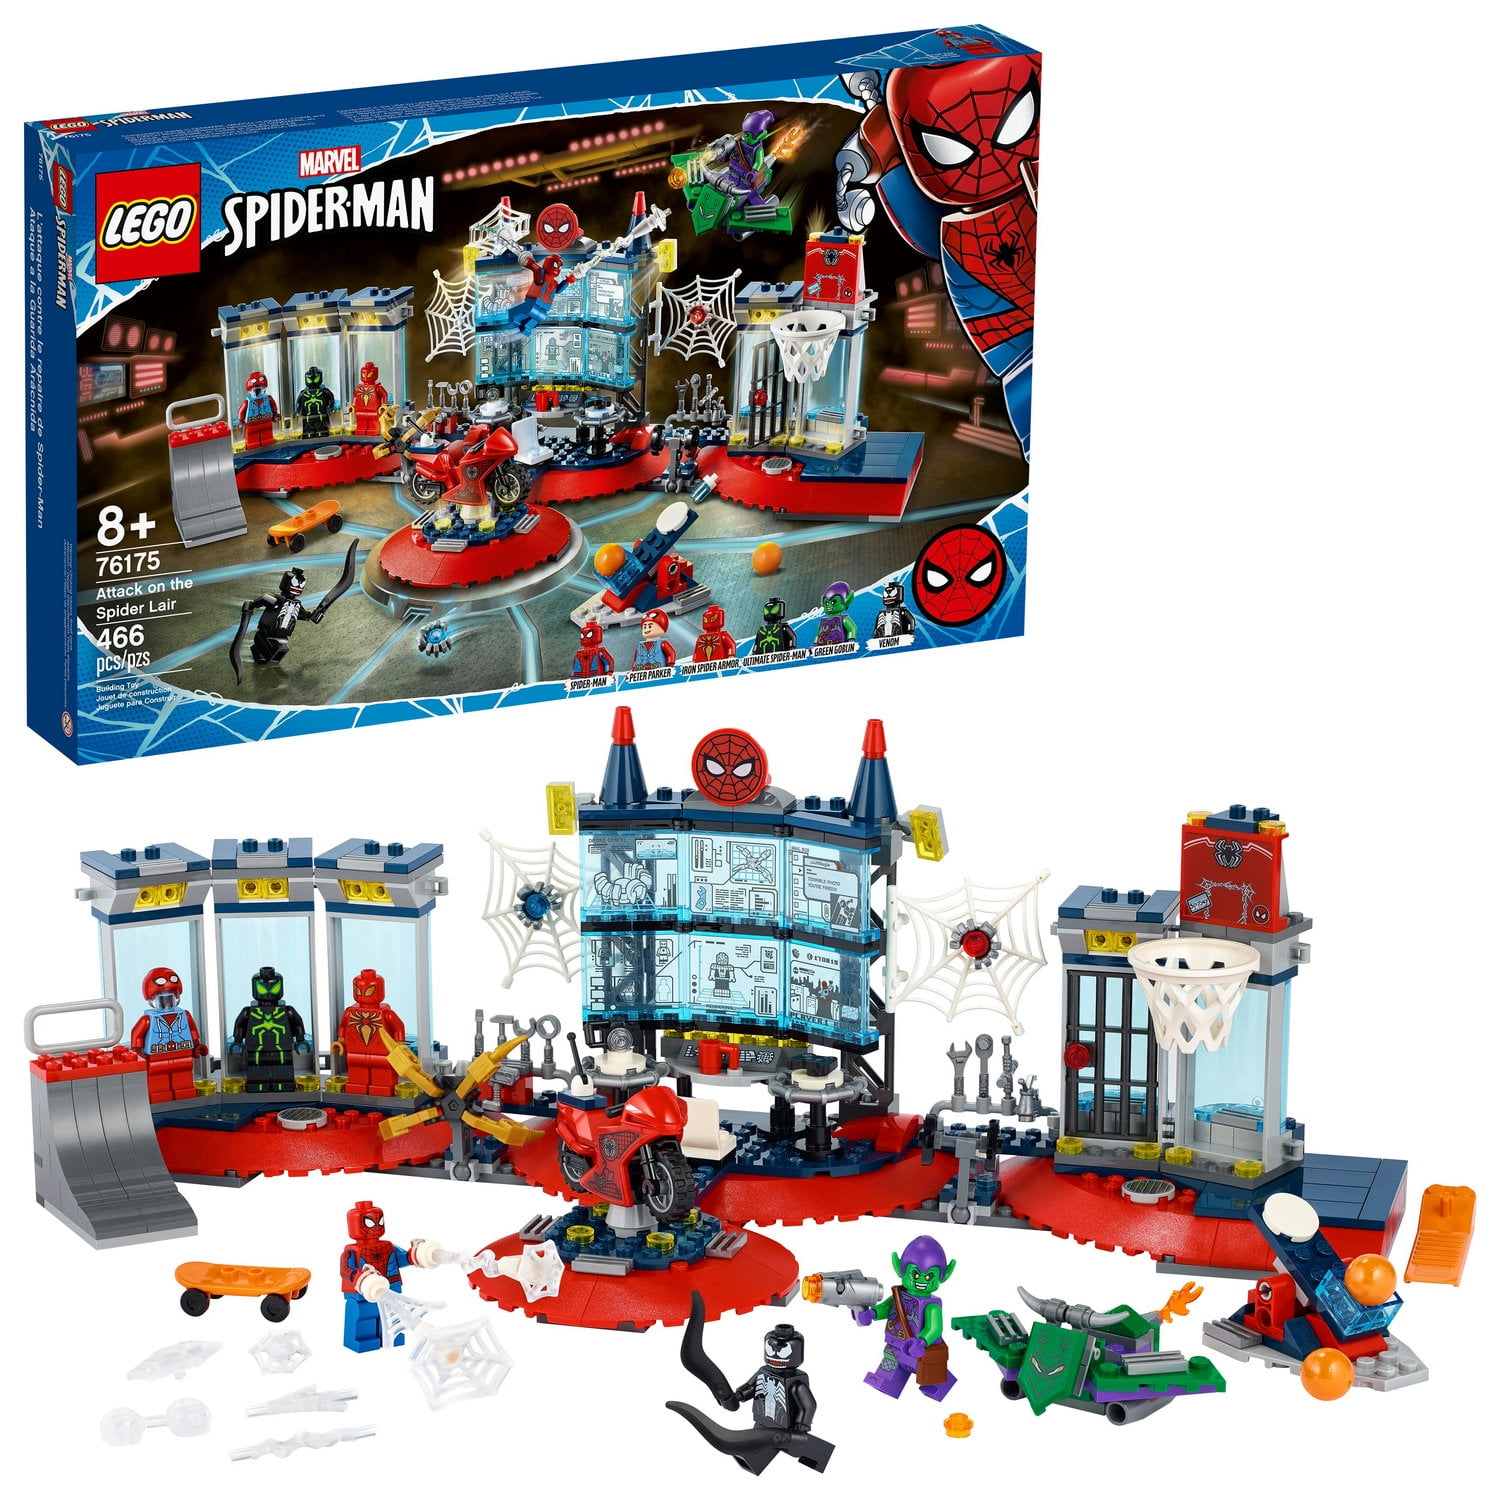 LEGO Marvel Spider-Man Attack on the Spider Lair 76175 Collectible Building Toy (466 - Walmart.com